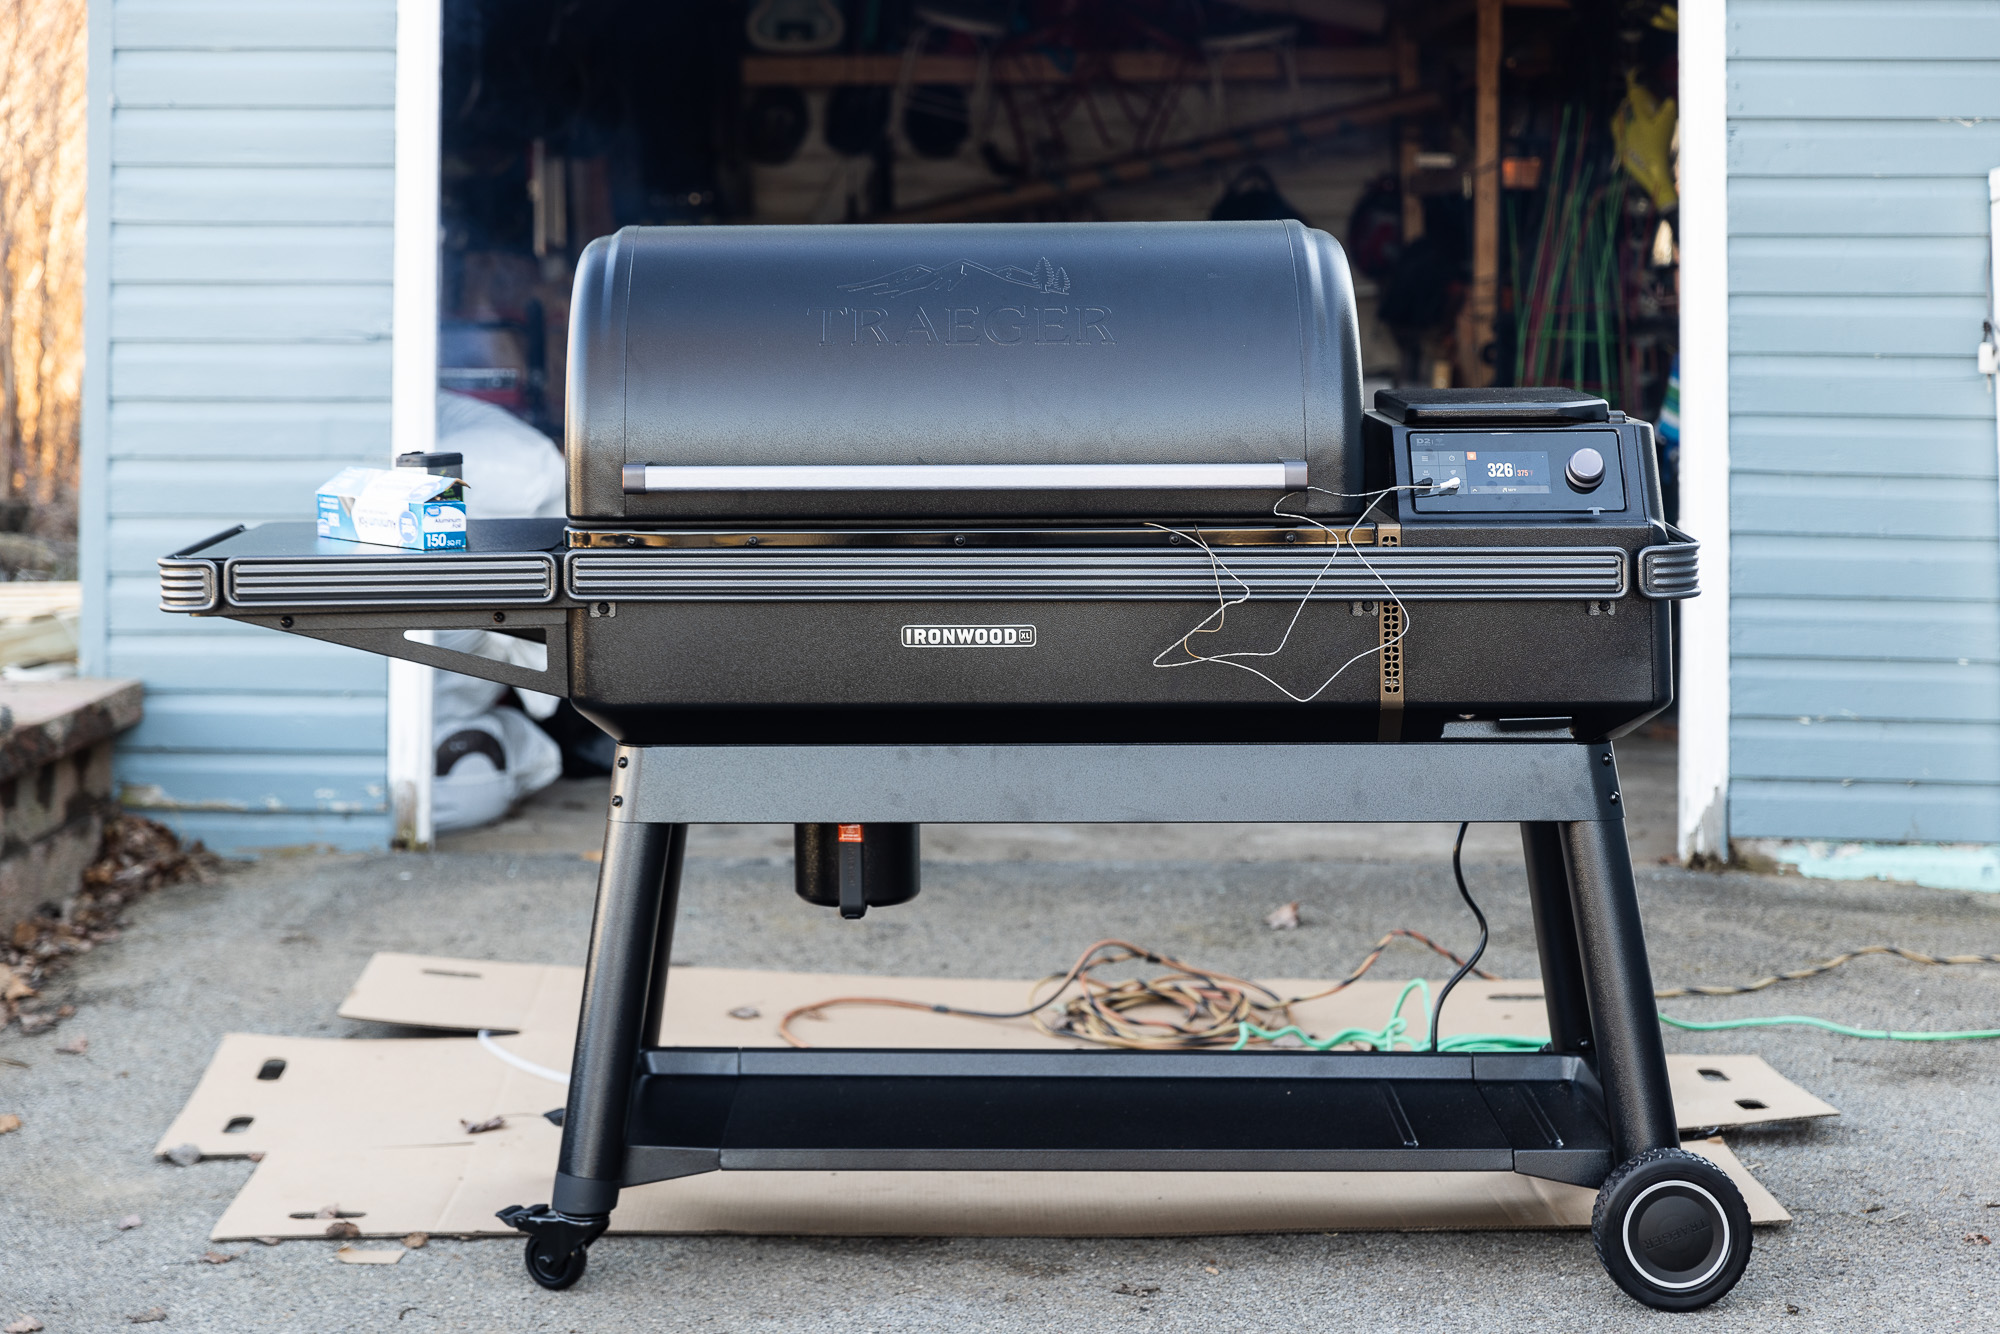 Traeger Ironwood pellet grill review King of the smoke ring